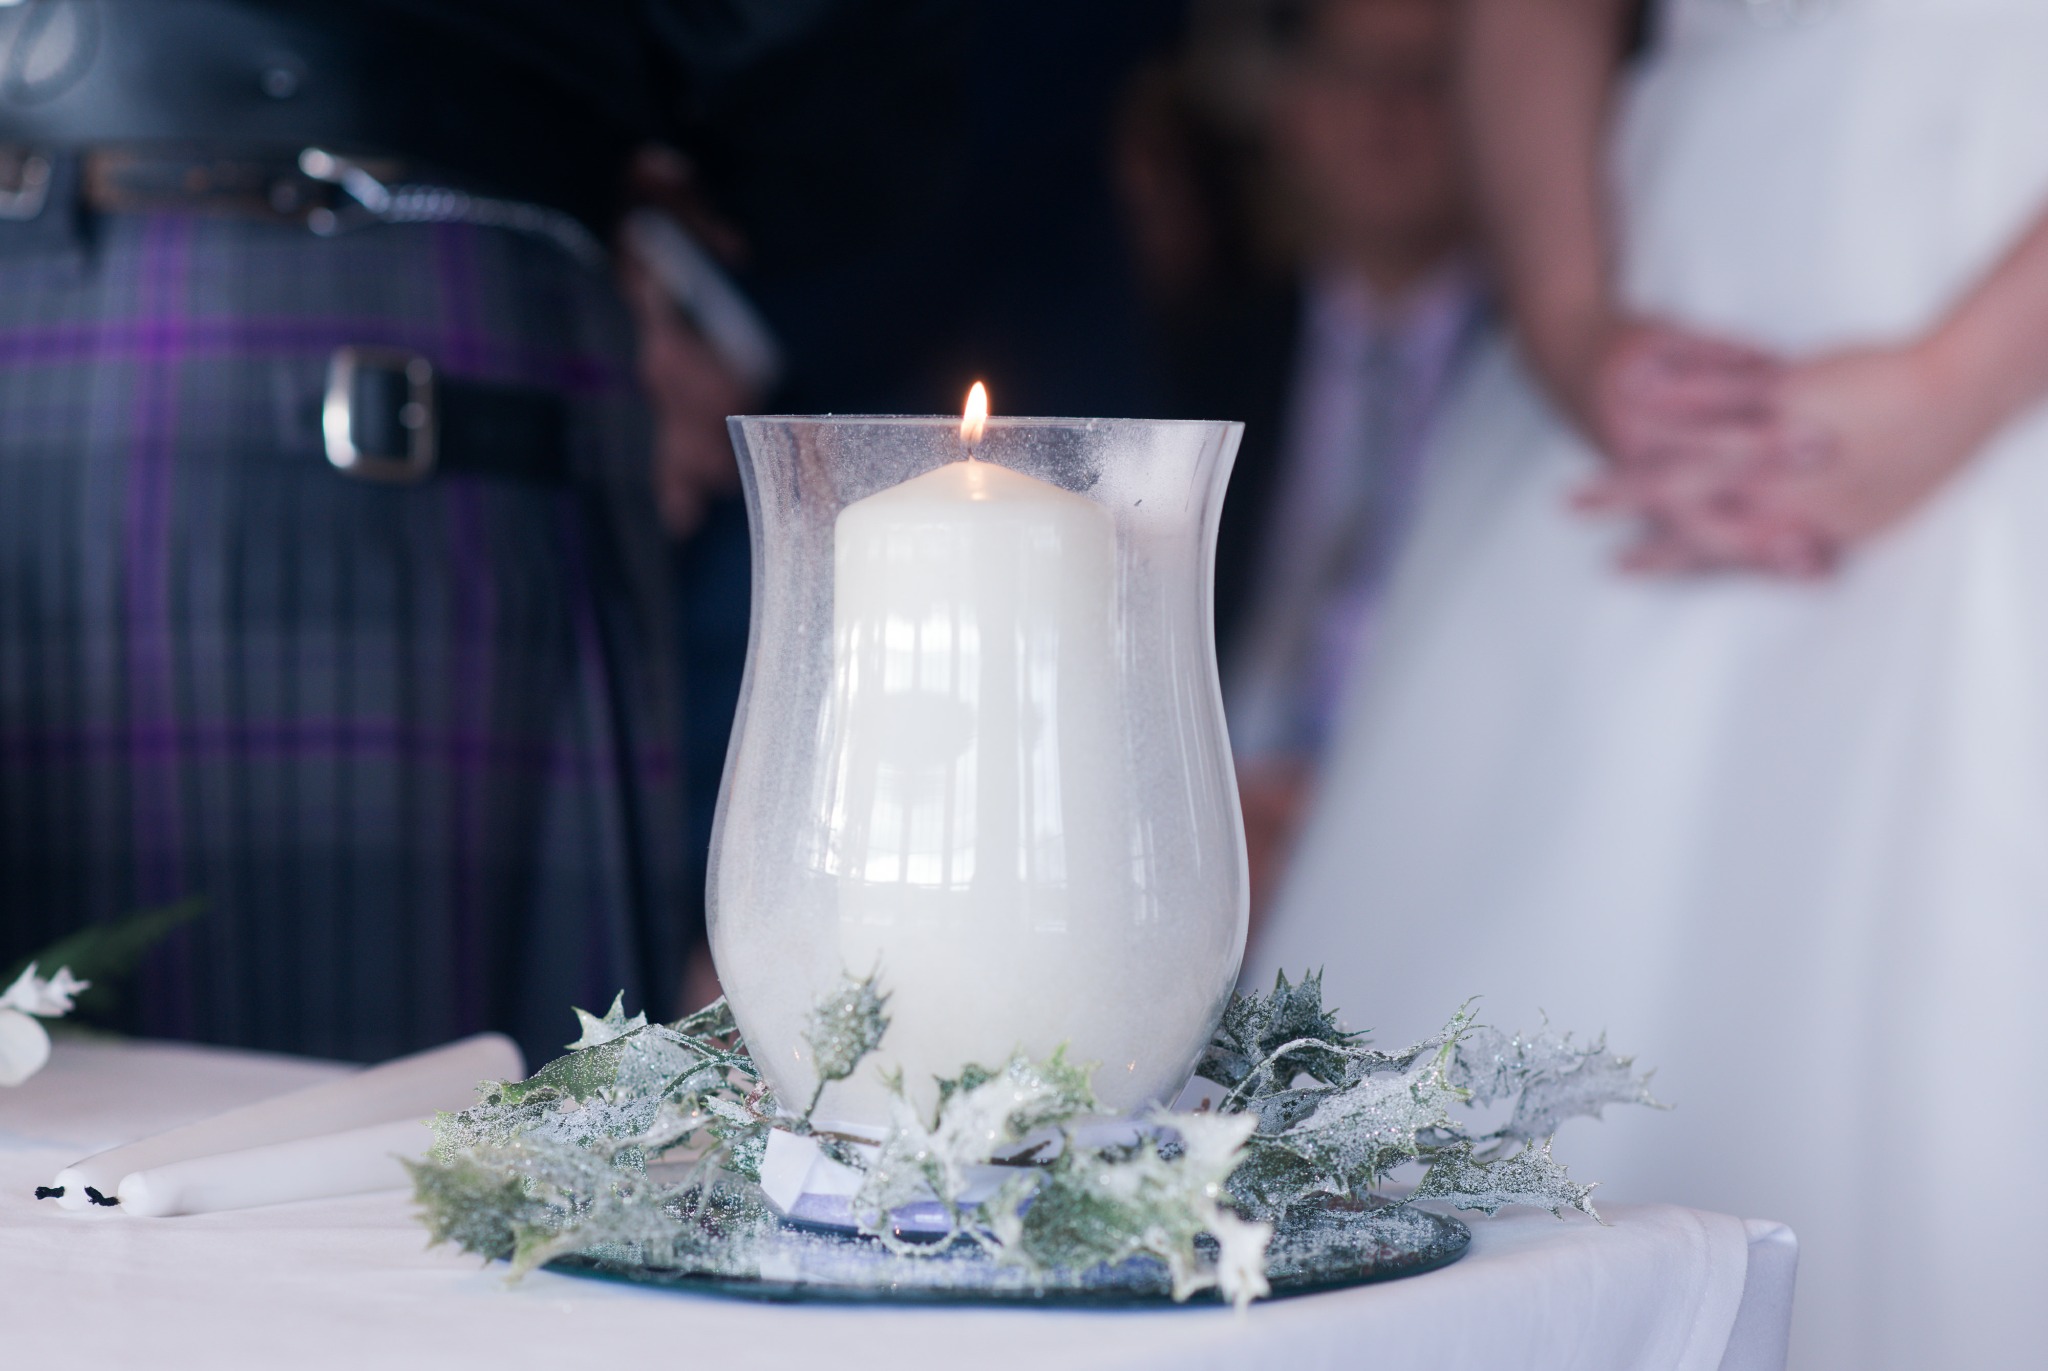 A Scotish wedding with a white candle.